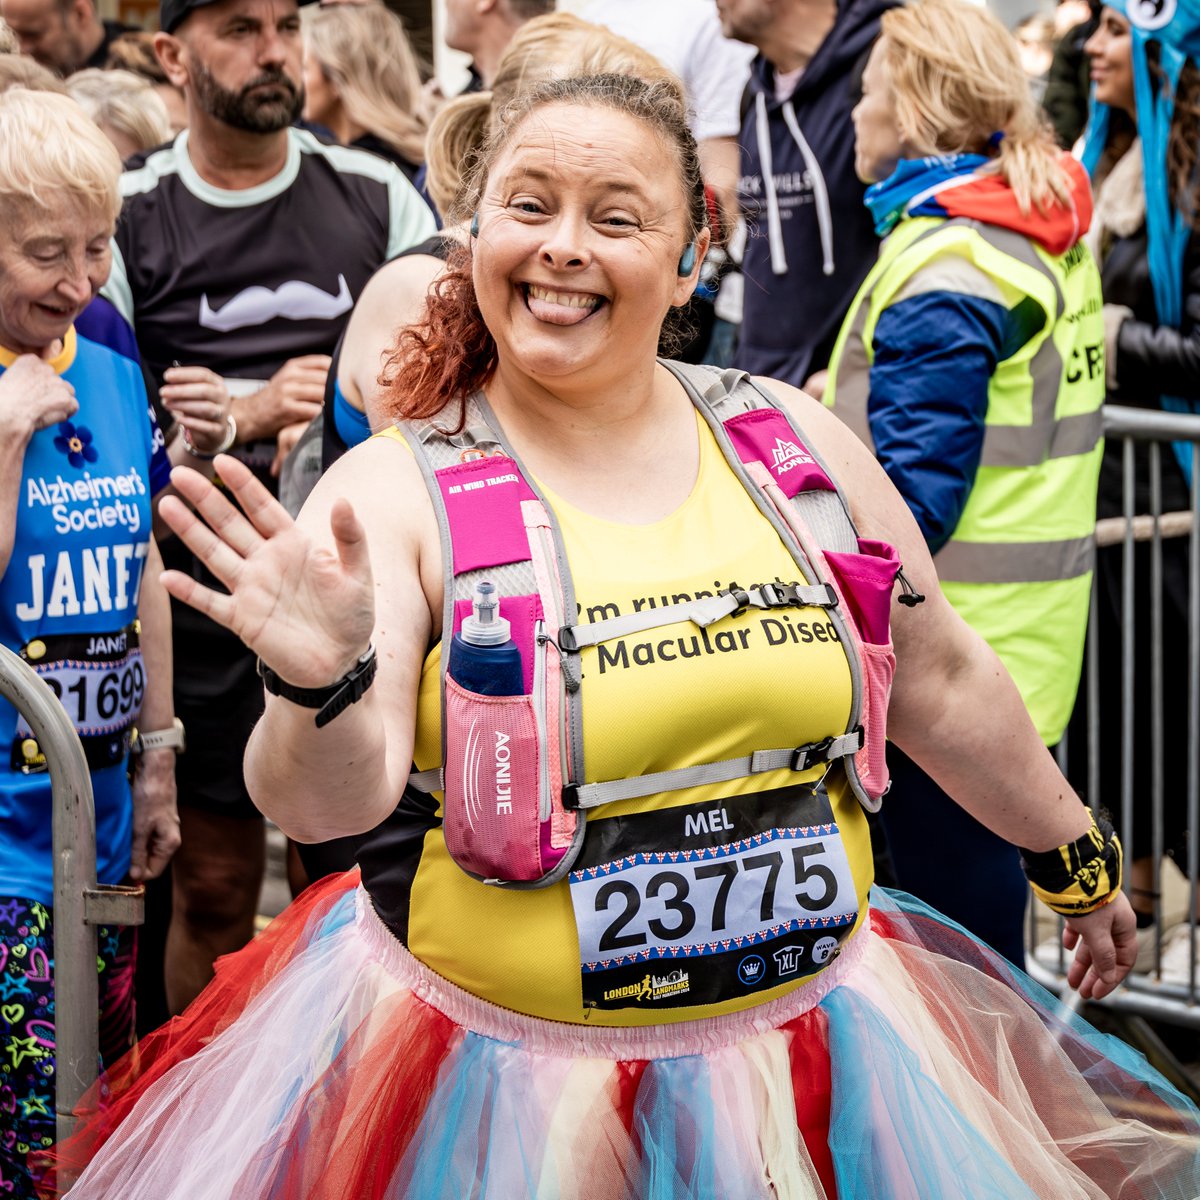 We are still riding that LLHM high one week on! Put your hand up if you enjoyed last weekend 👋 Fancy doing it all again next year? Pre-register on our website for LLHM 2025! #LLHM #RacePB #HalfMarathon #London #RaceDay